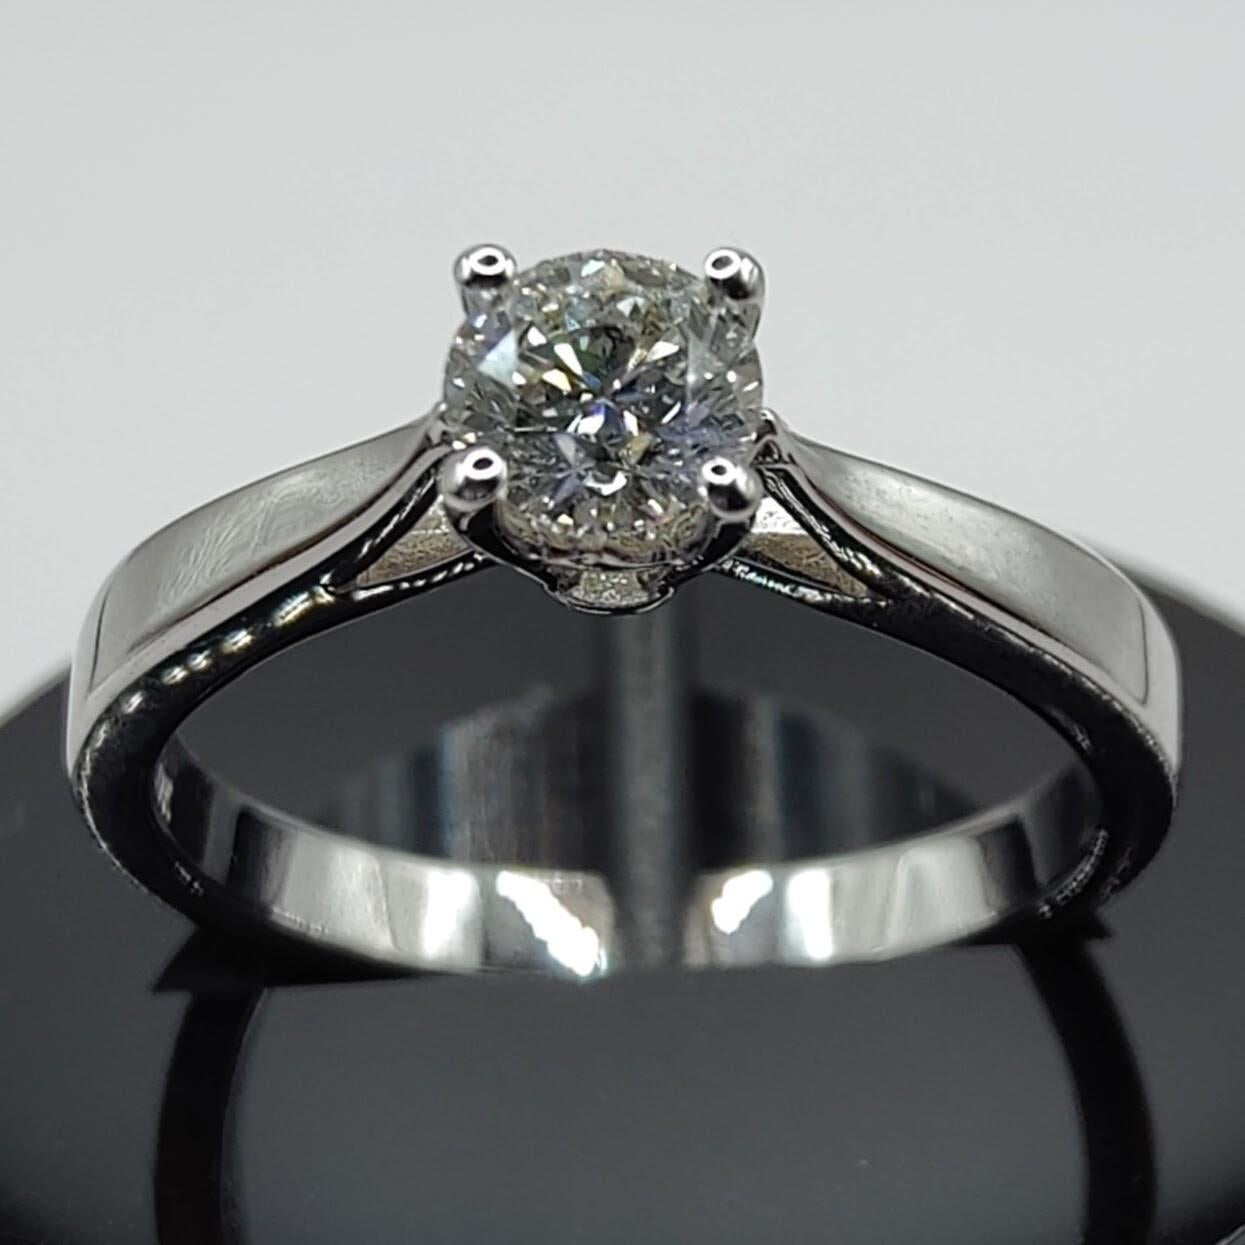 This classic yet modern solitaire diamond engagement ring is the perfect choice for anyone looking for a timeless and elegant piece. The ring is made of high quality 18k white gold and features a single sparkling 0.37 carat brilliant-cut diamond